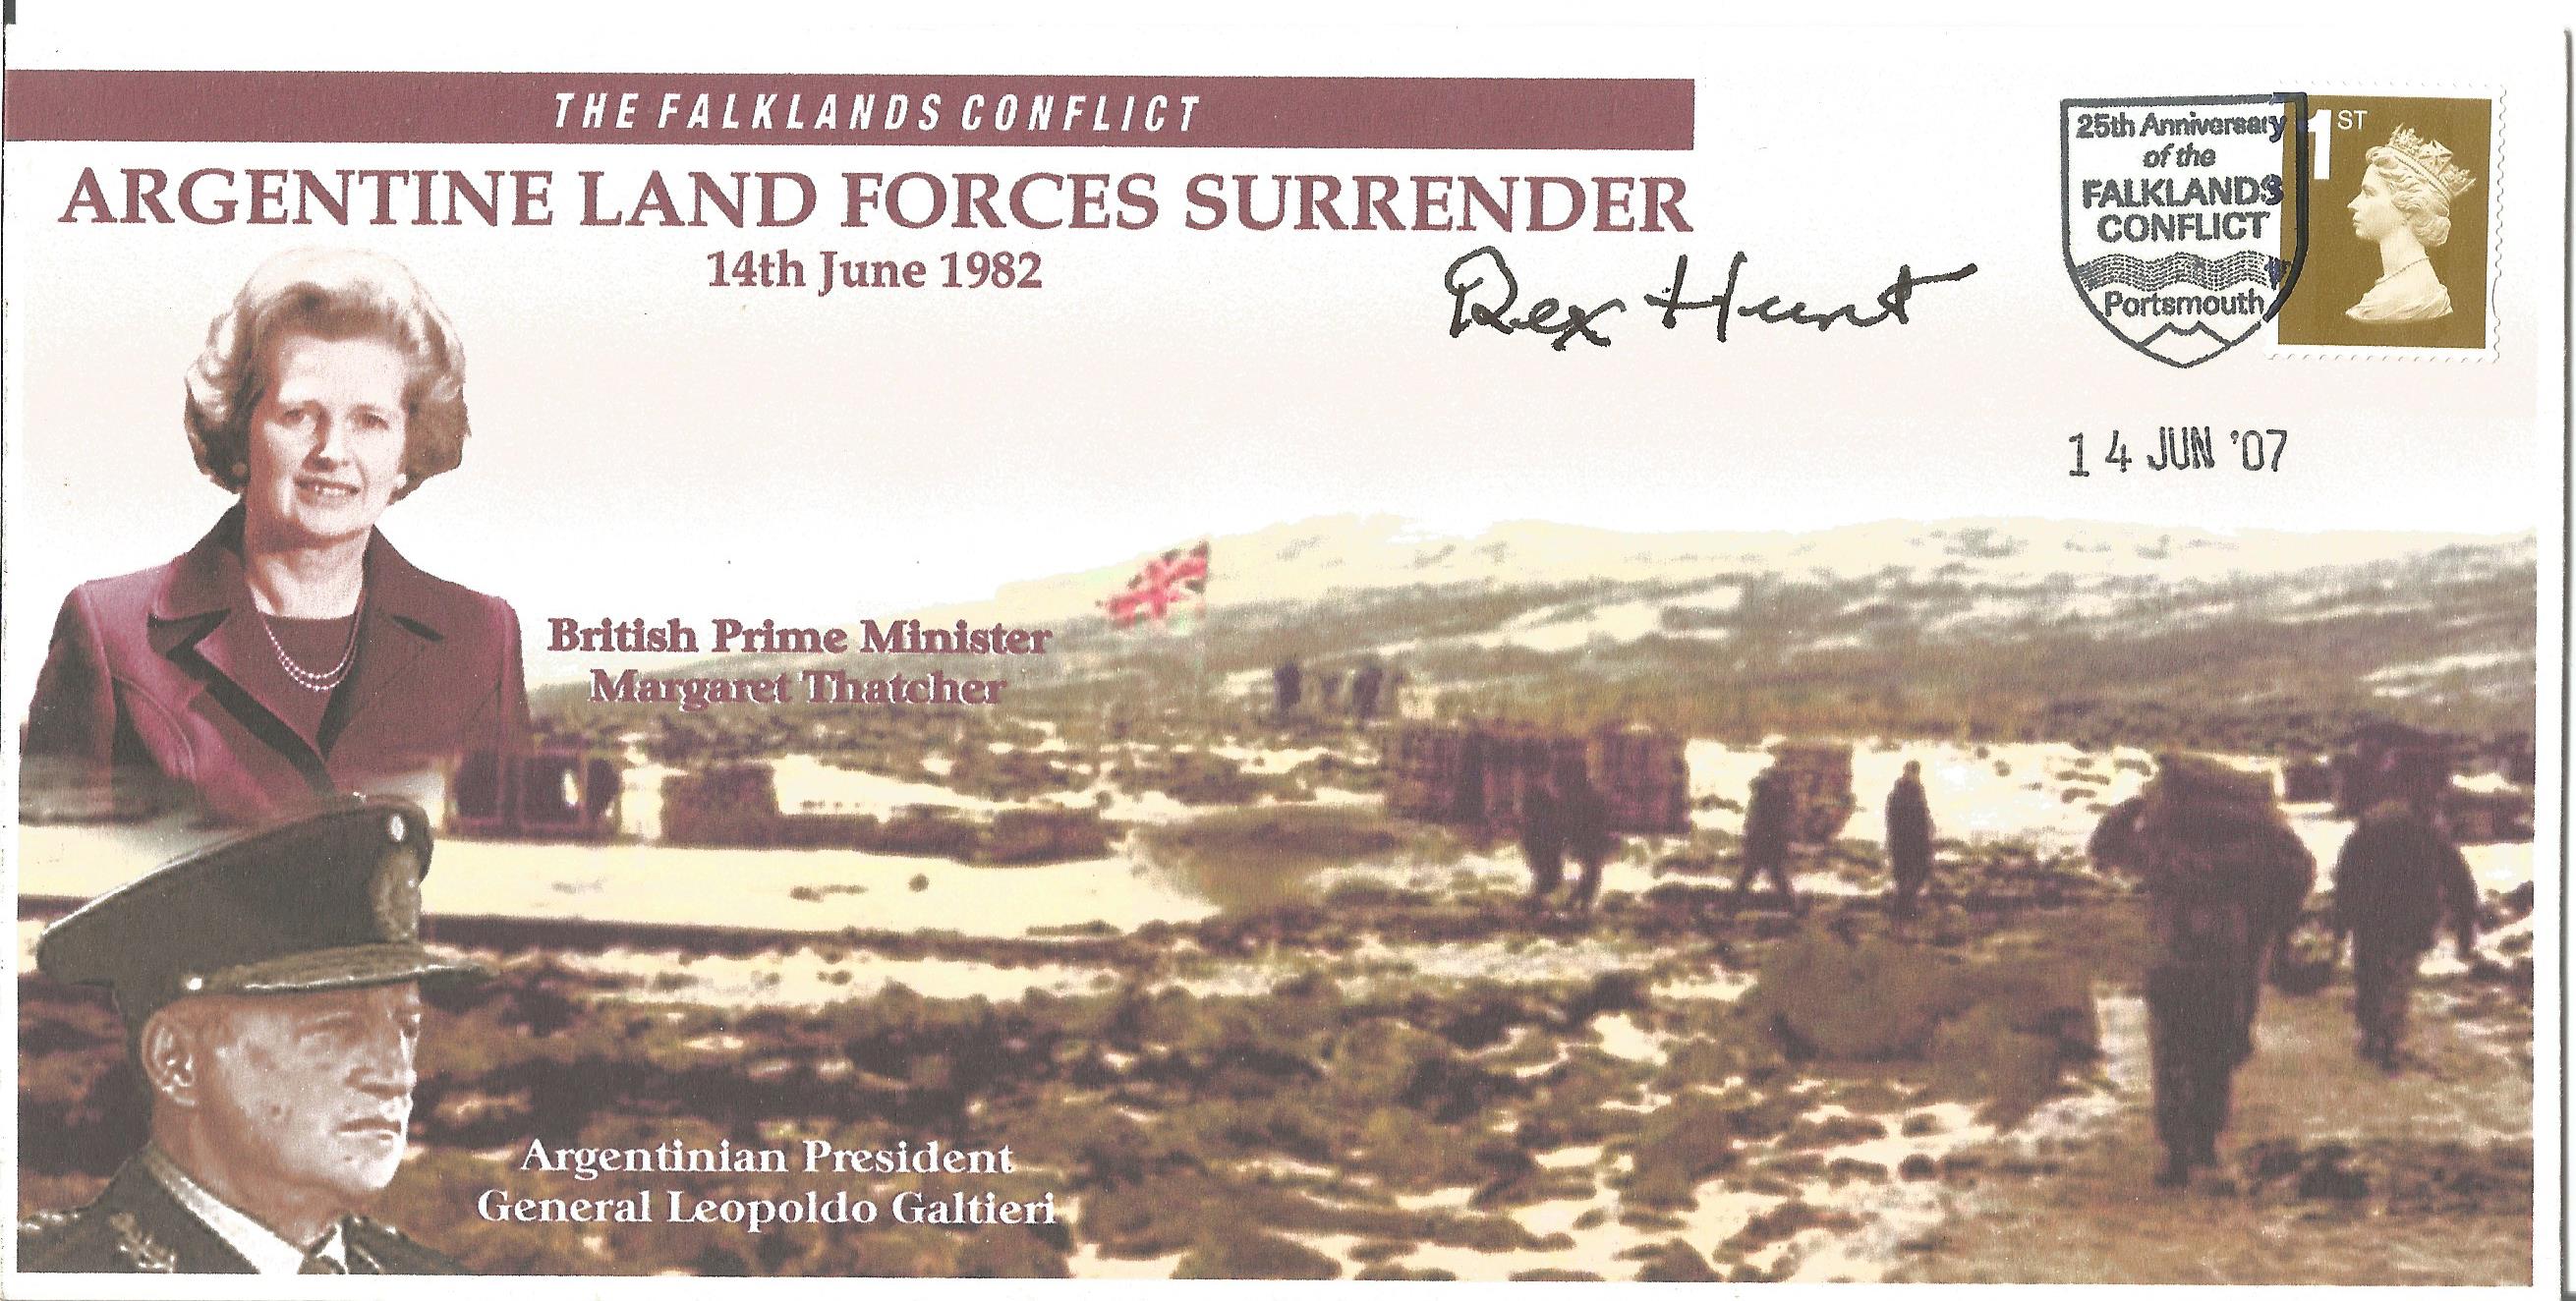 Falklands War Sir Rex Hunt CMG Governor and C in C The Falkland Islands 1982 signed Series Cover The